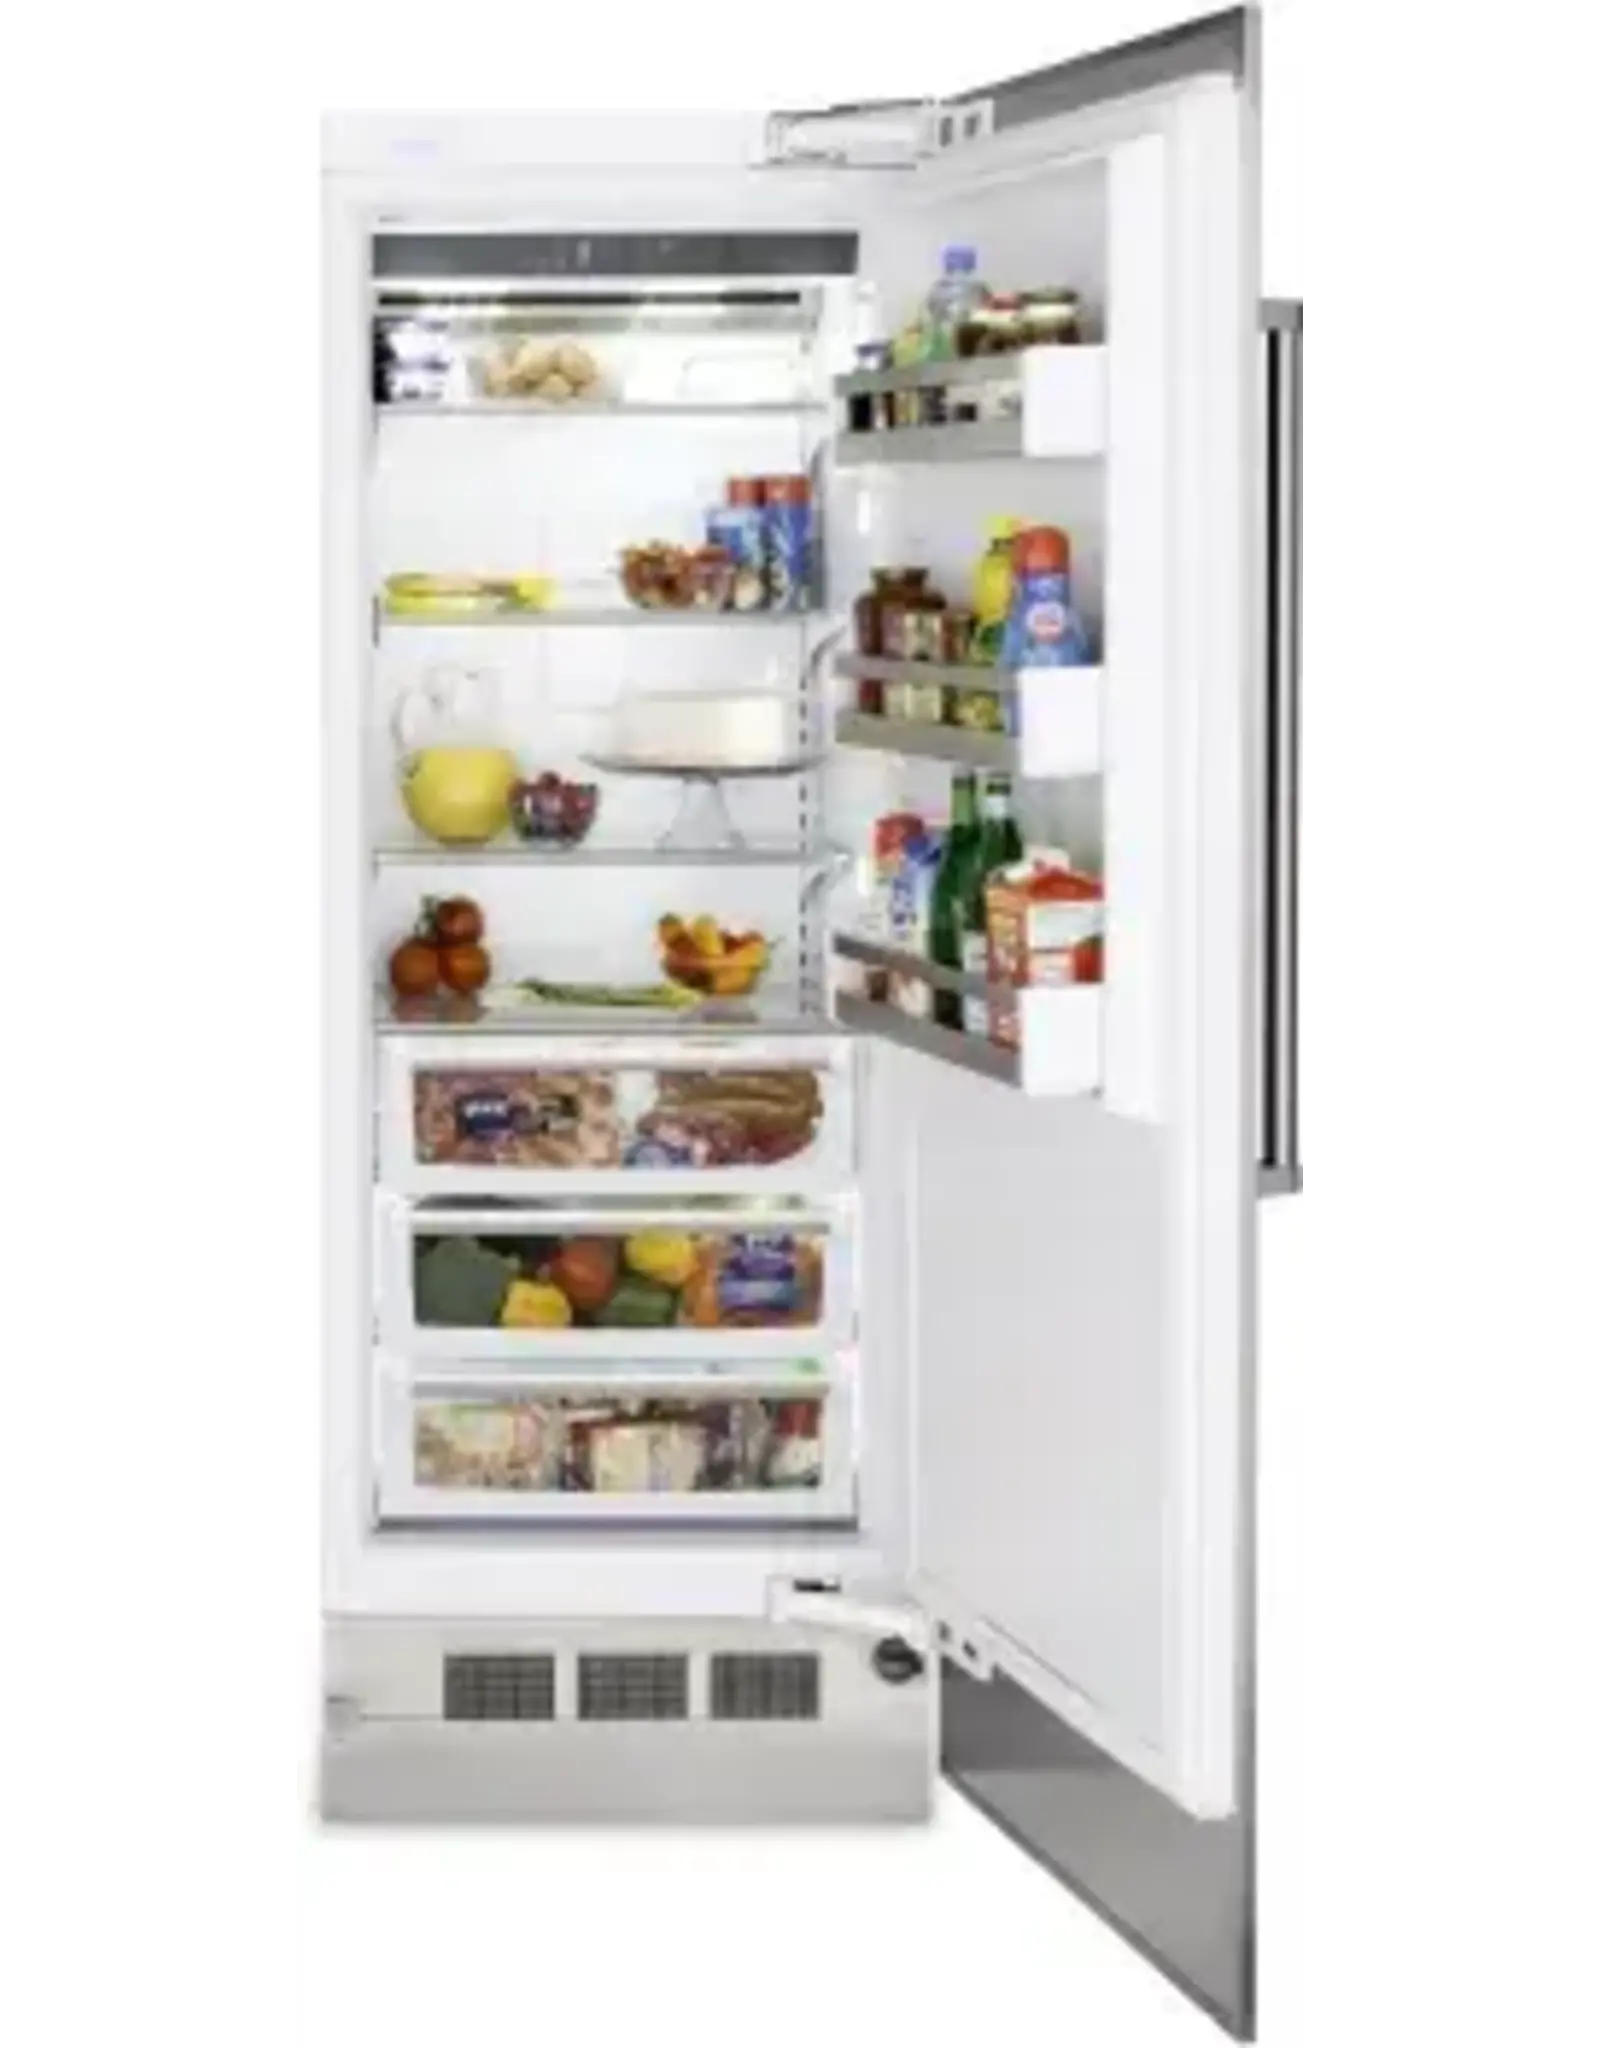 viking VR17300WRSS  30 Inch Refrigerator Column with 16.4 Cu. Ft. Capacity, BlueZone™ Fresh Preservation, Capacitive Touch Controls, Led Lighting, Spillproof Plus™ Shelves, Overdrive™ Compressor, and Feather Touch™ Internal Water Dispenser: Stainless Steel, Righ